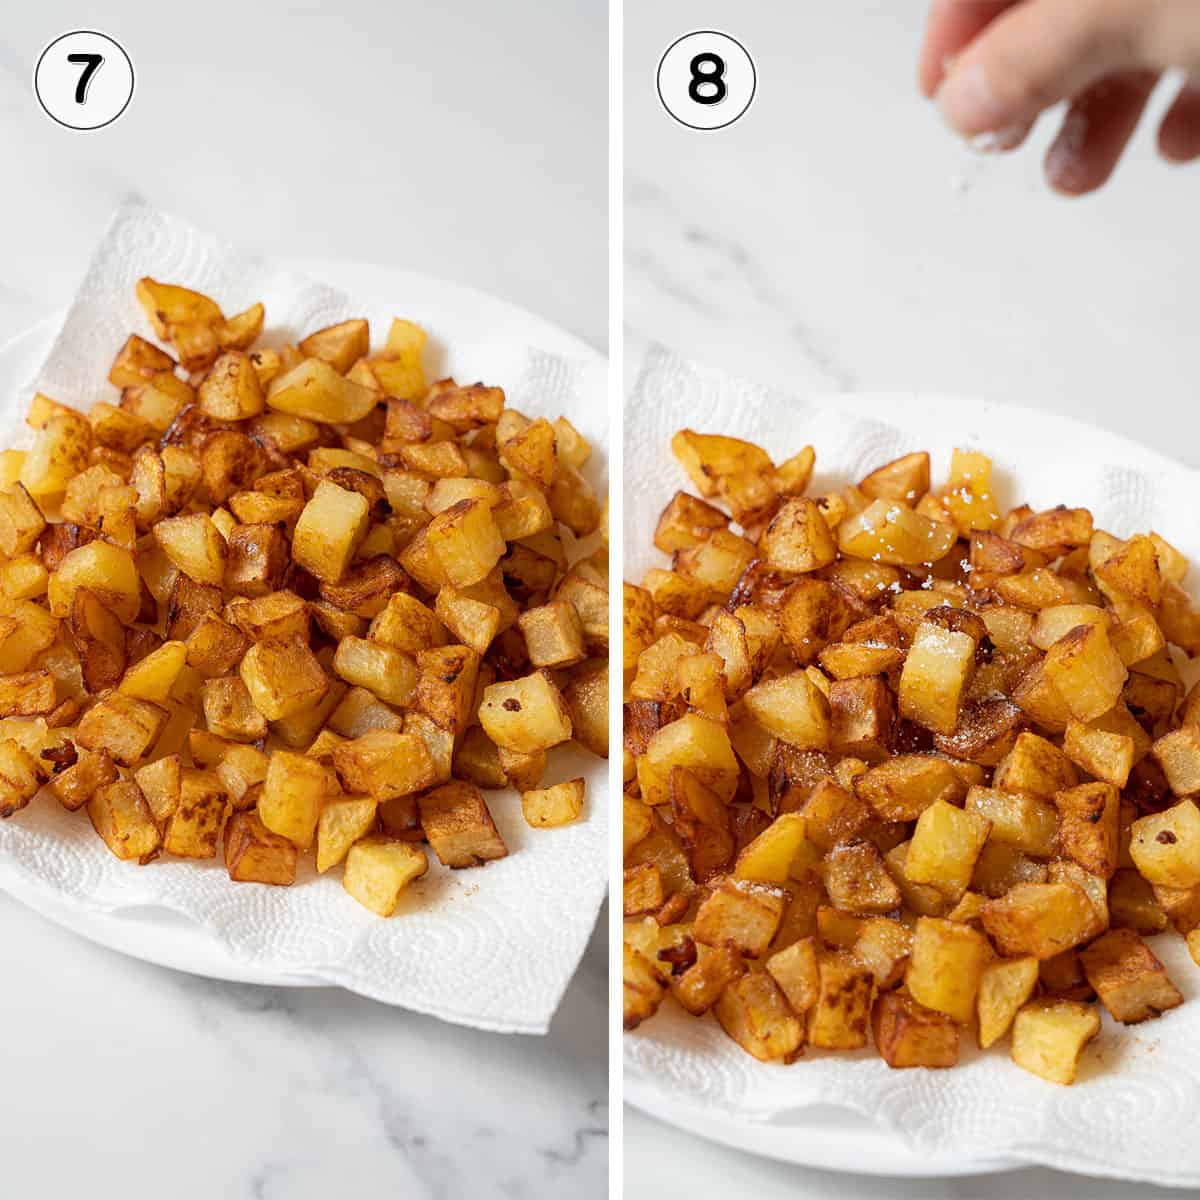 draining fried potato cubes on paper towel and sprinkling with salt.